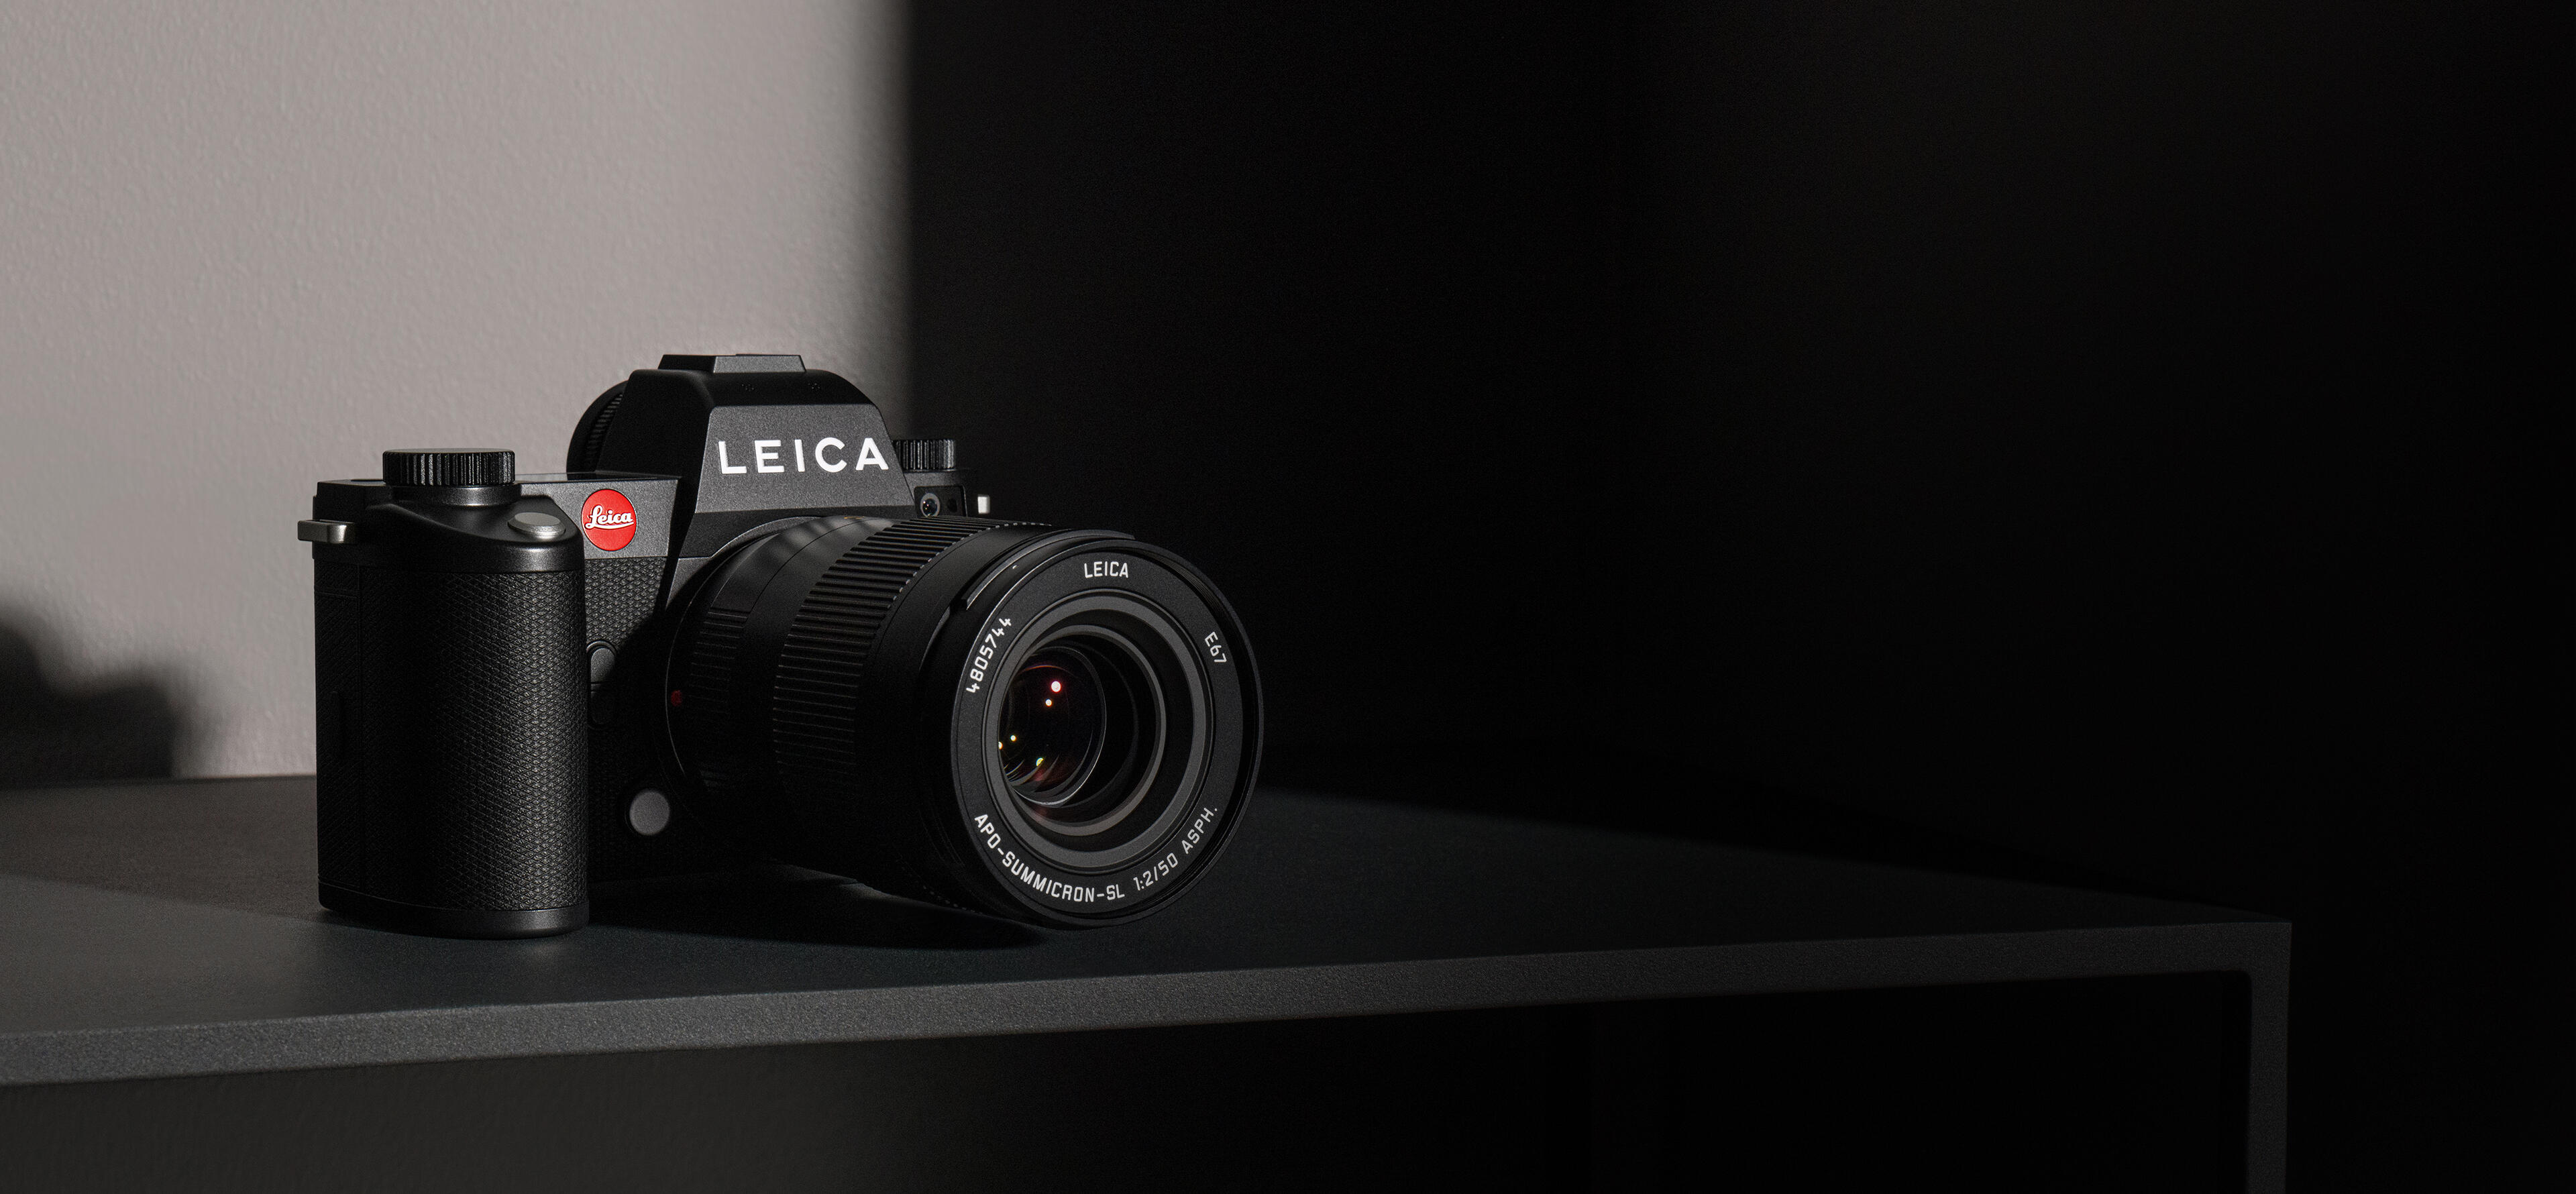 Leica SL3 photo from official website